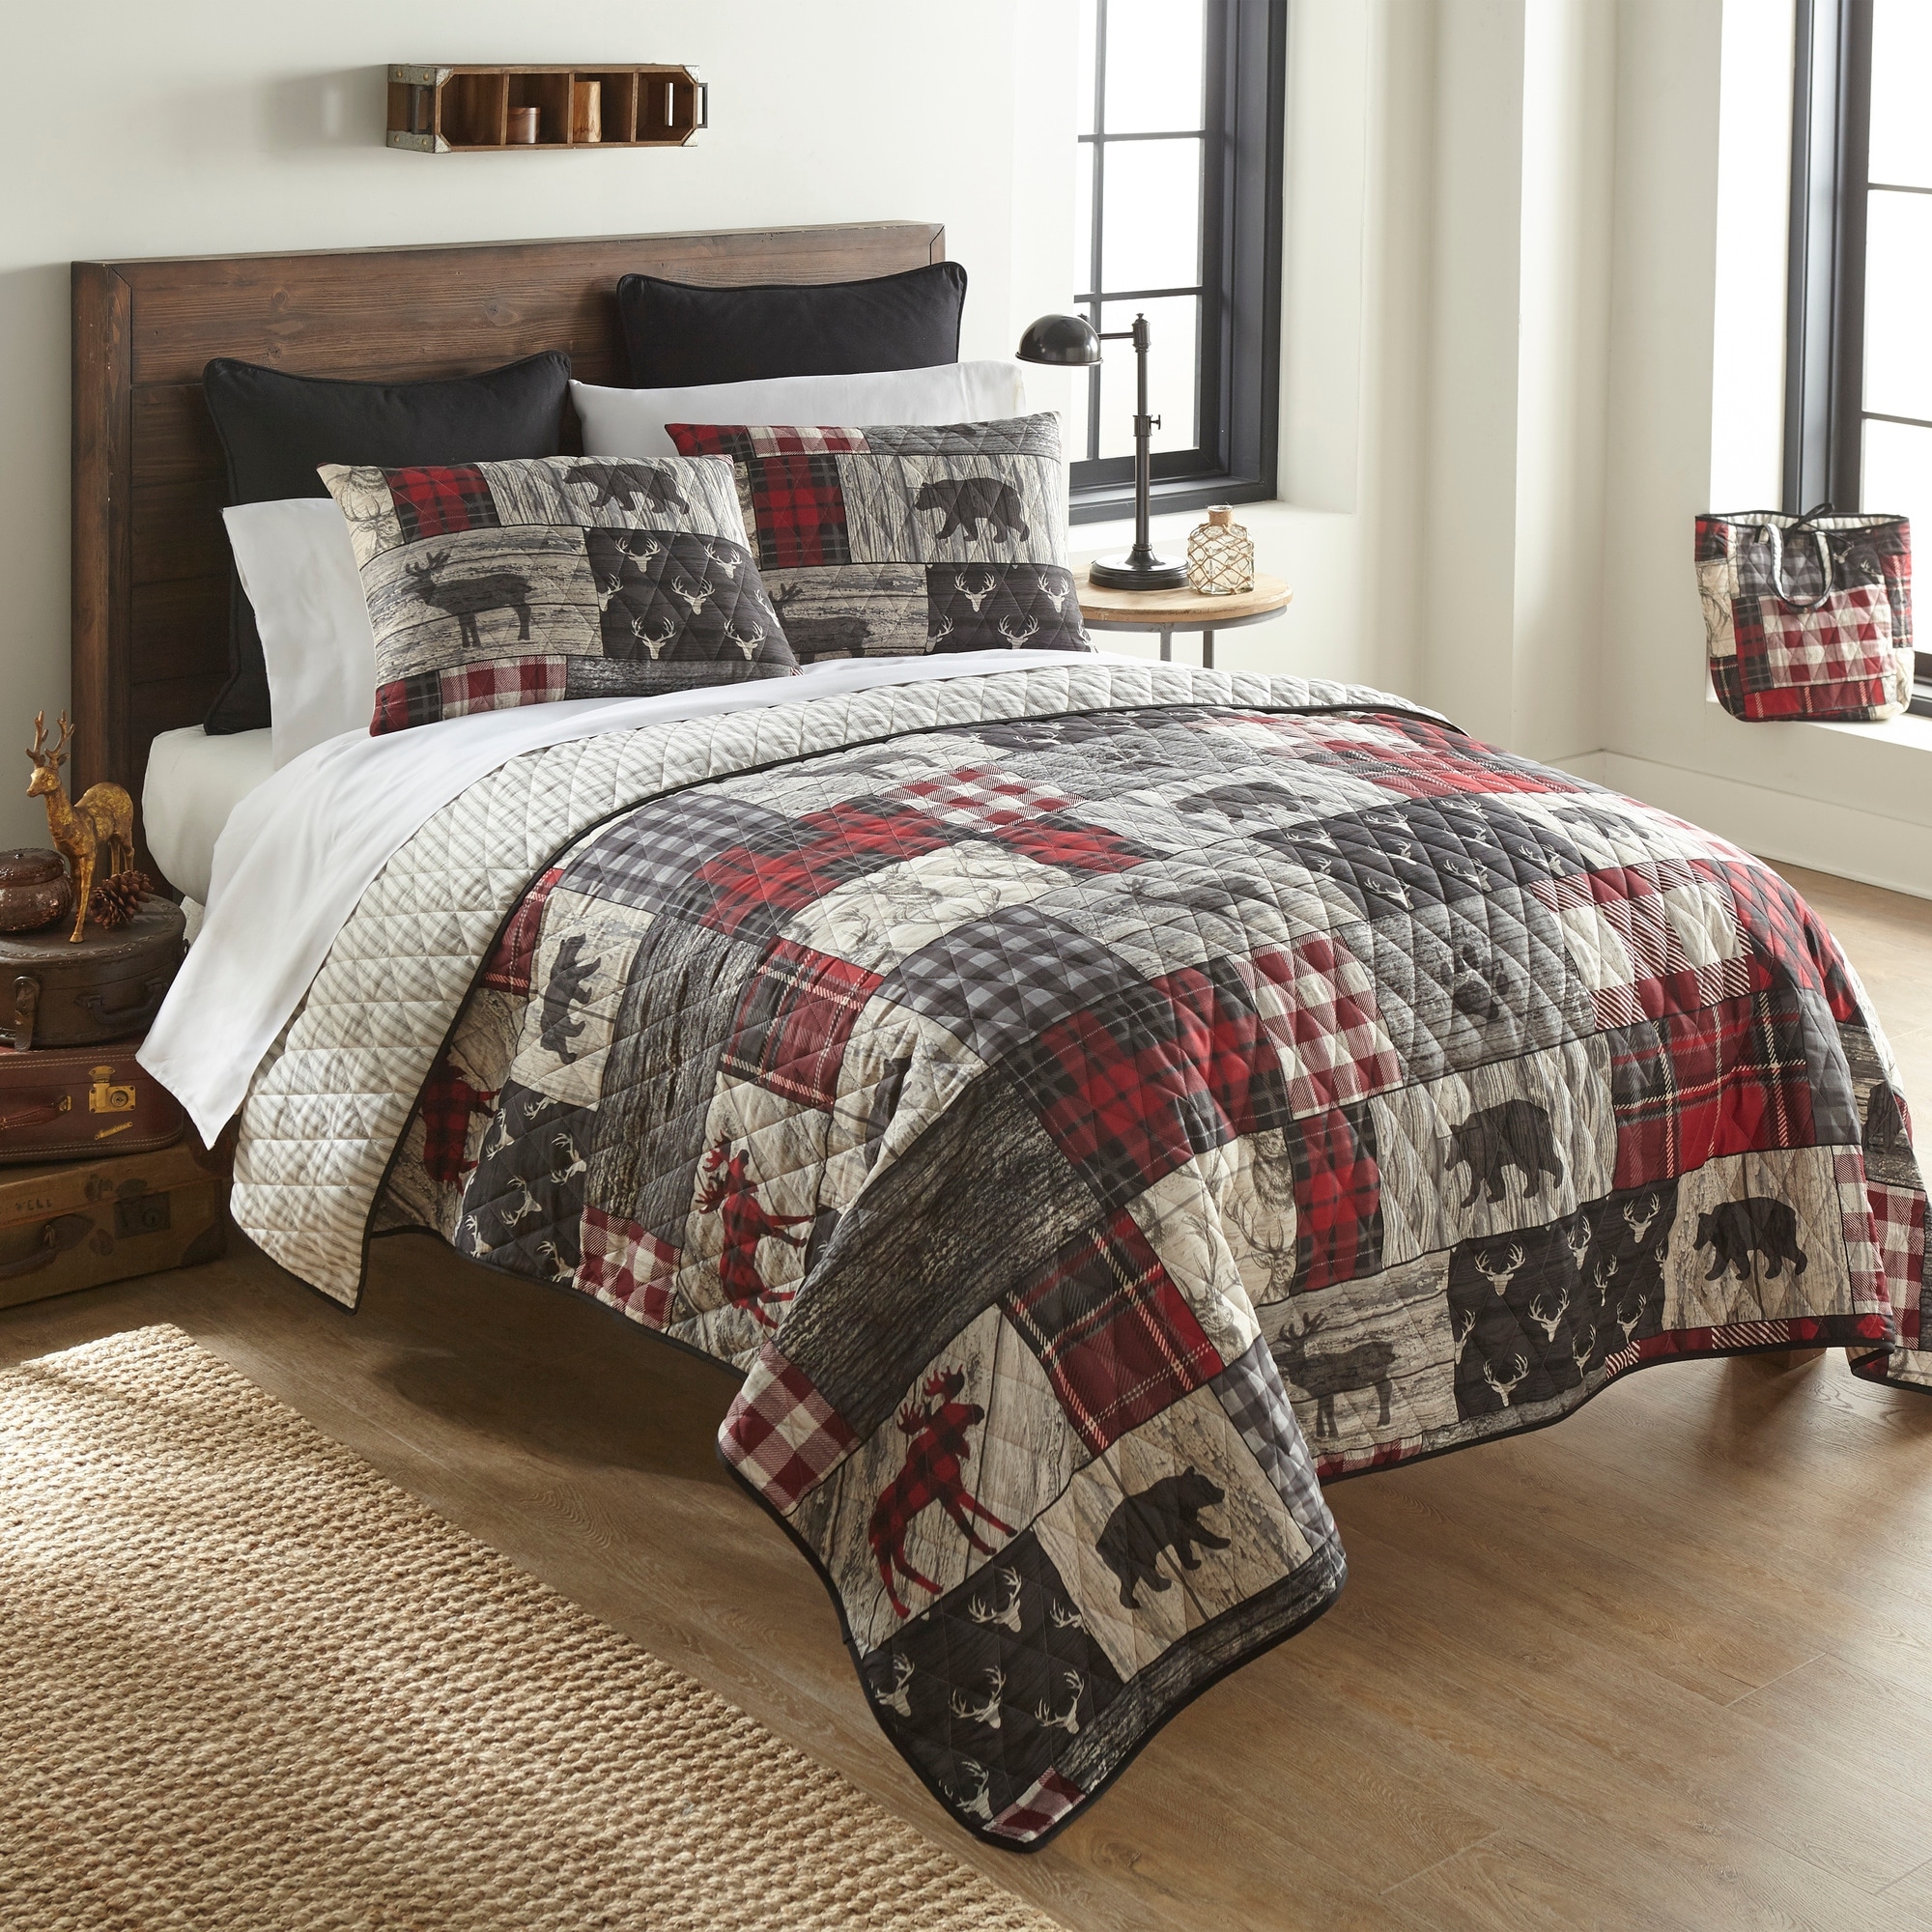 https://ak1.ostkcdn.com/images/products/is/images/direct/7dbe9787f14fdbd05c7f5e0507c387b96f235aad/Your-Lifestyle-by-Donna-Sharp-Timber-3-PC-Quilt-Set.jpg